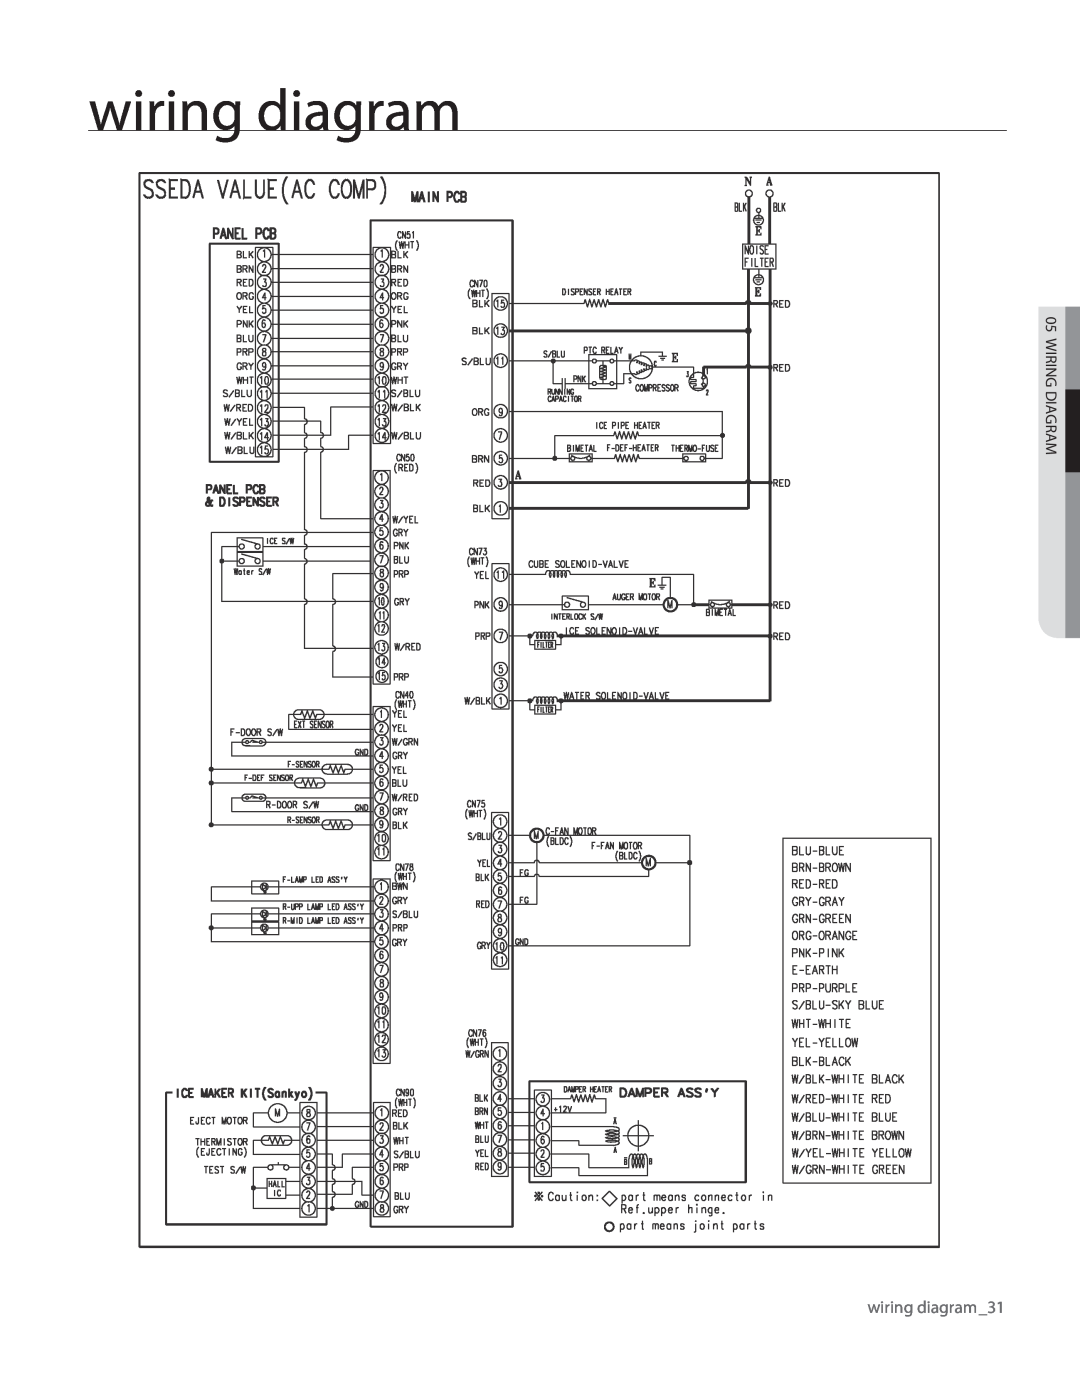 Samsung RS261MDWP, RS261MDBP, RS261MDRS, RS261MDPN user manual wiring diagram31, Wiring Diagram 